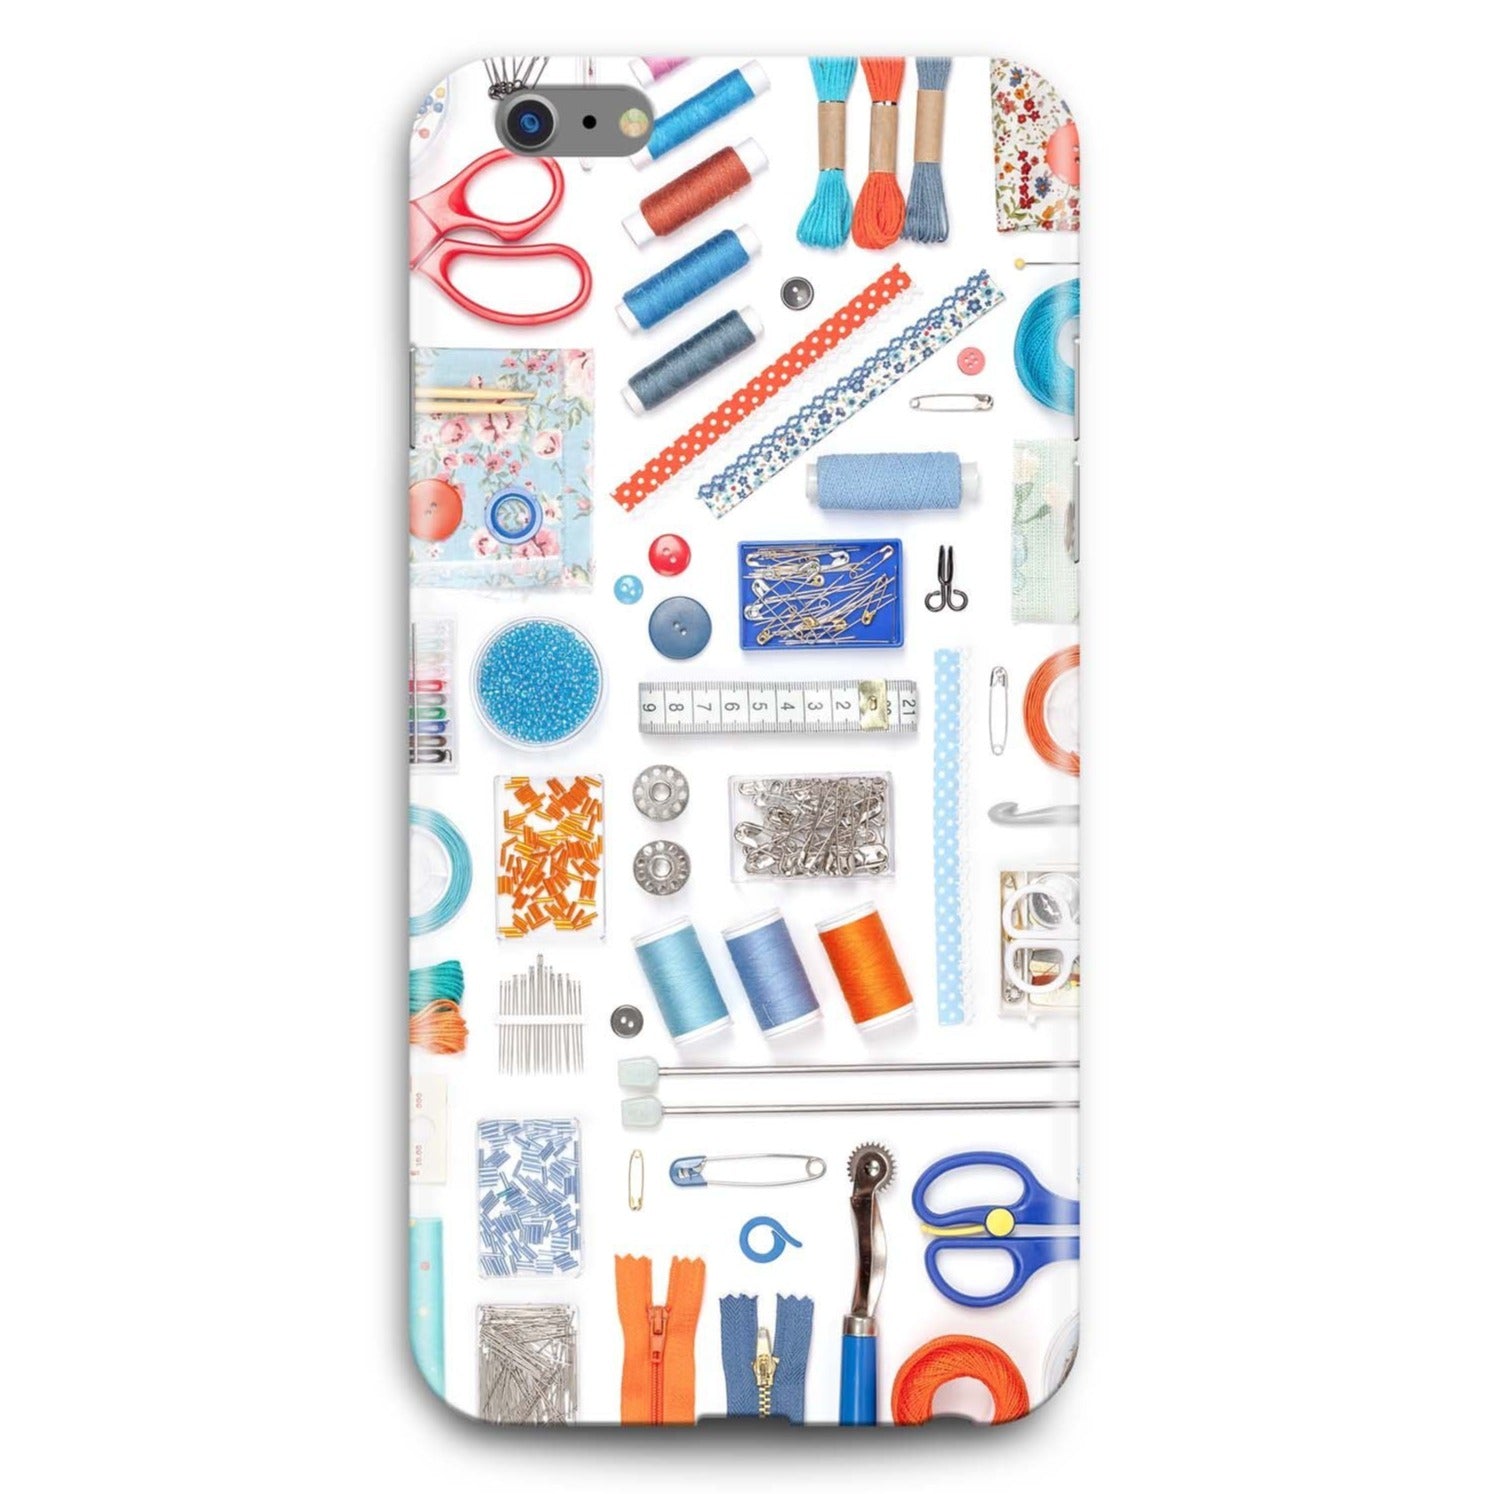 Sewing Phone Case - Free shipping USA and Canada